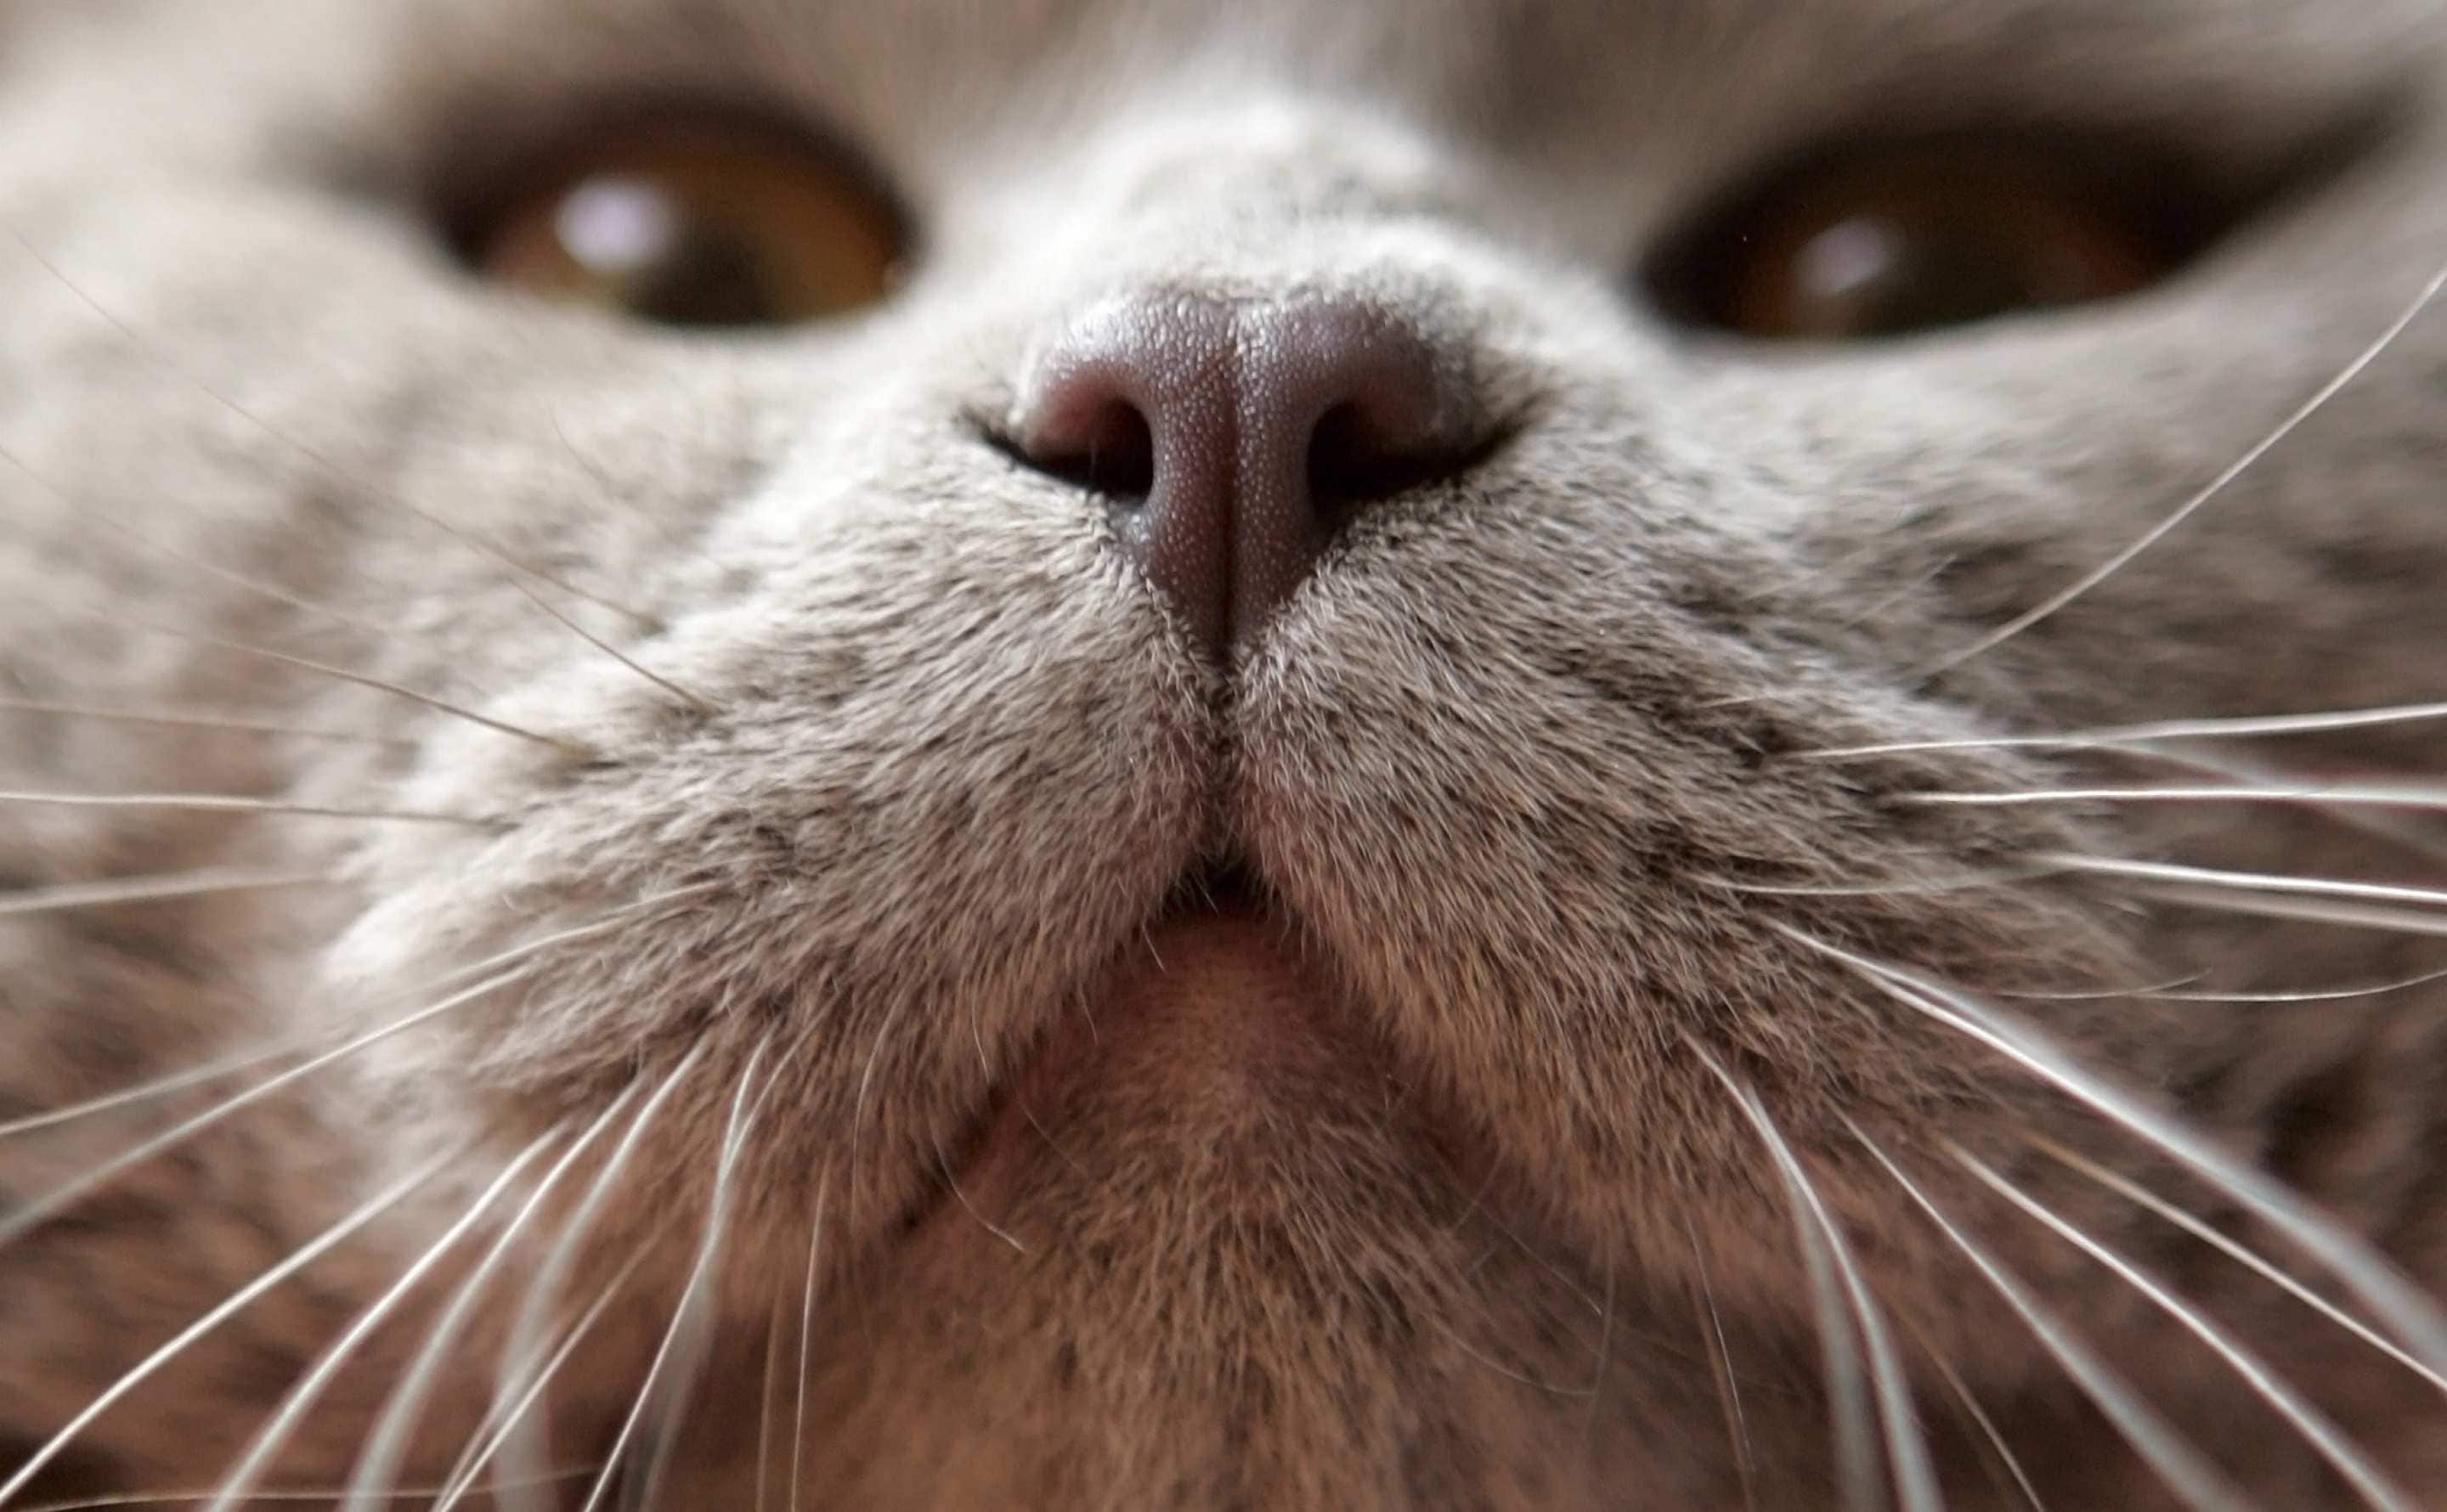 Close-up of a cat's face